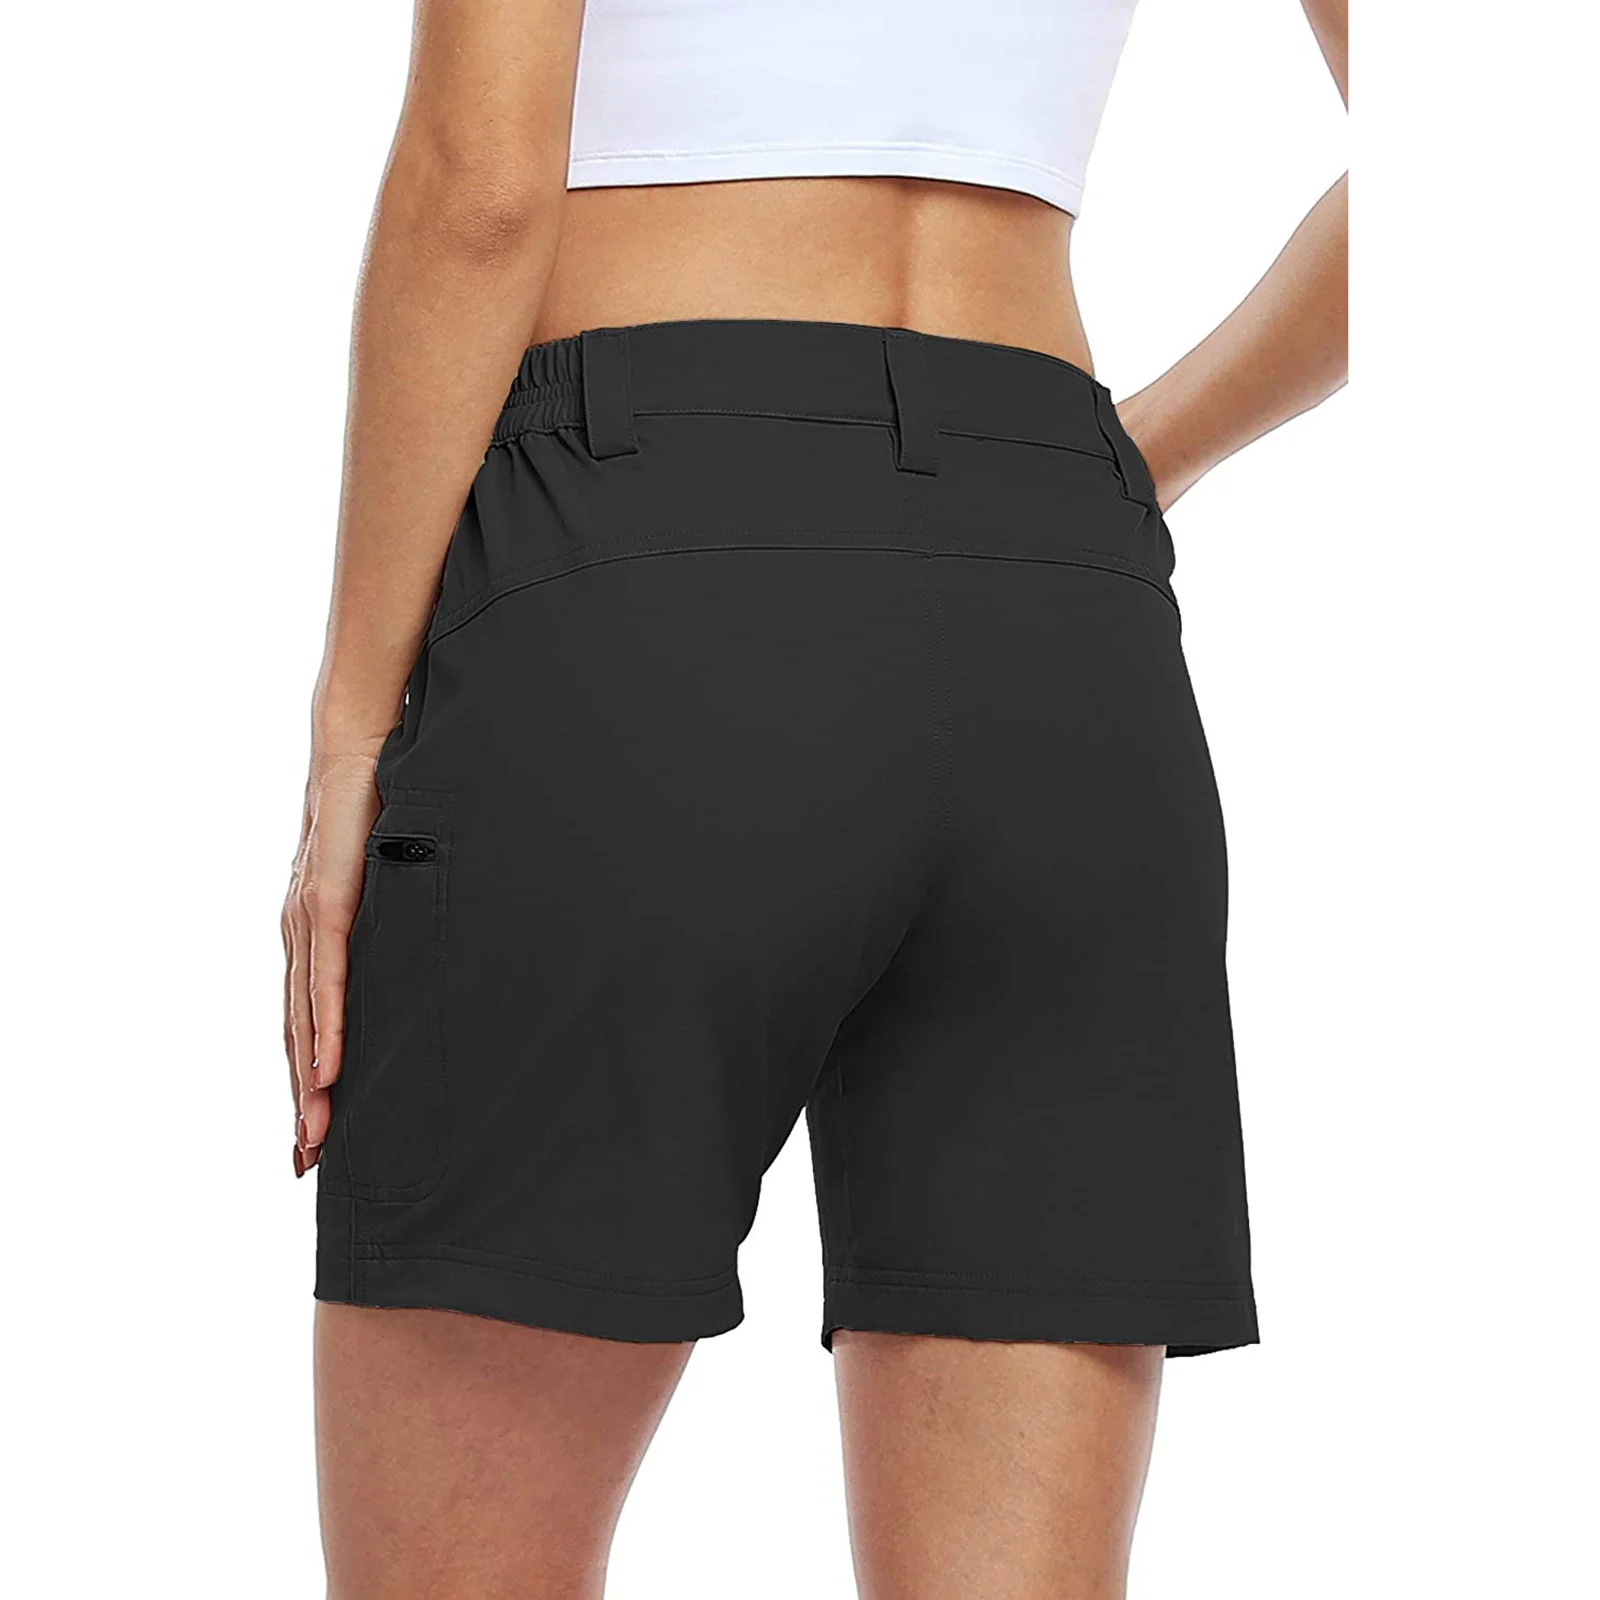 Women Summer Casual Shorts 2021 New Style Fashion Solid Color Side Pockets Zipper Cargo Short Pants for Women High Waist Shorts soffe shorts Shorts